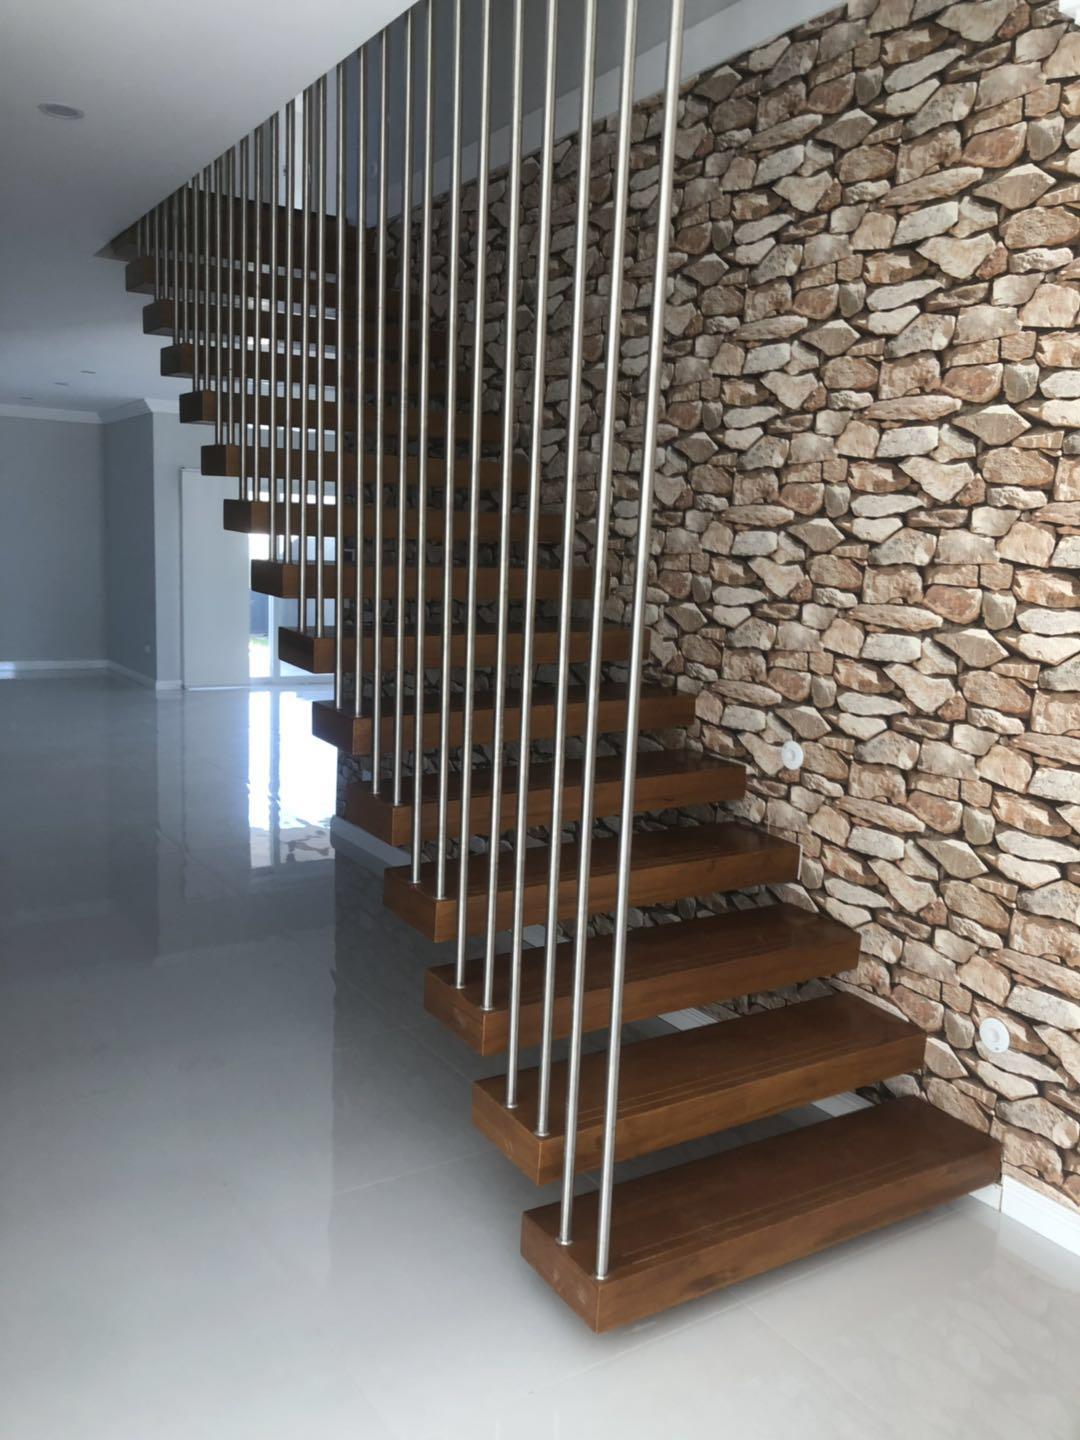 YUDI Stairs floating stair treads for apartment